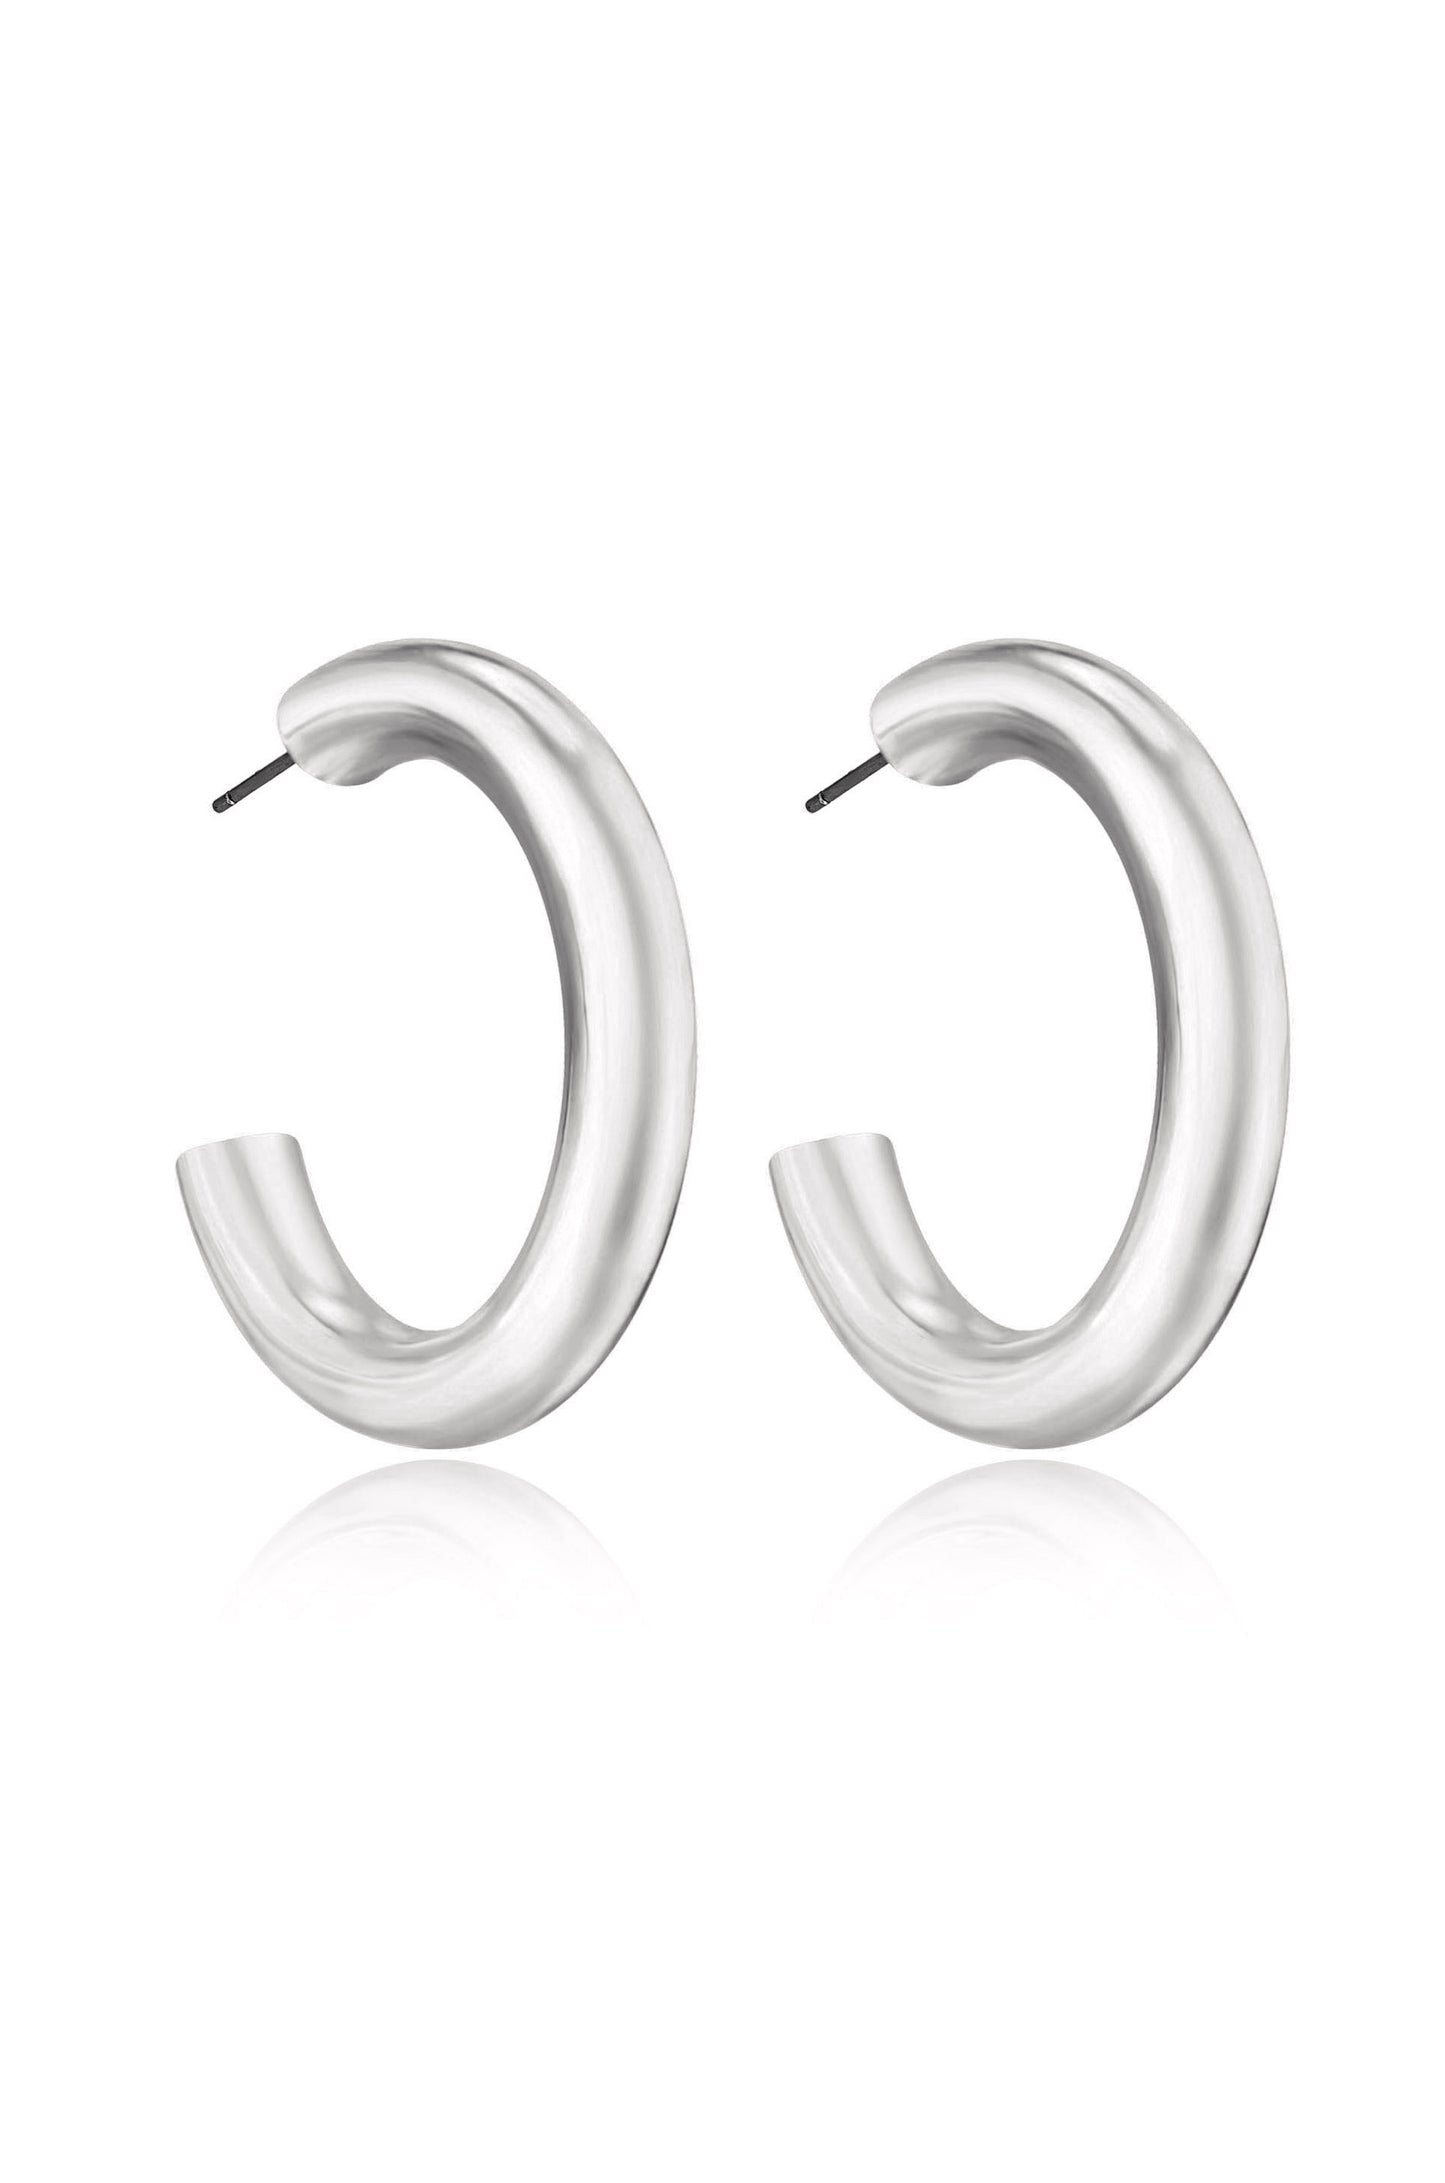 Thick Classic Hoops in medium in rhodium side view